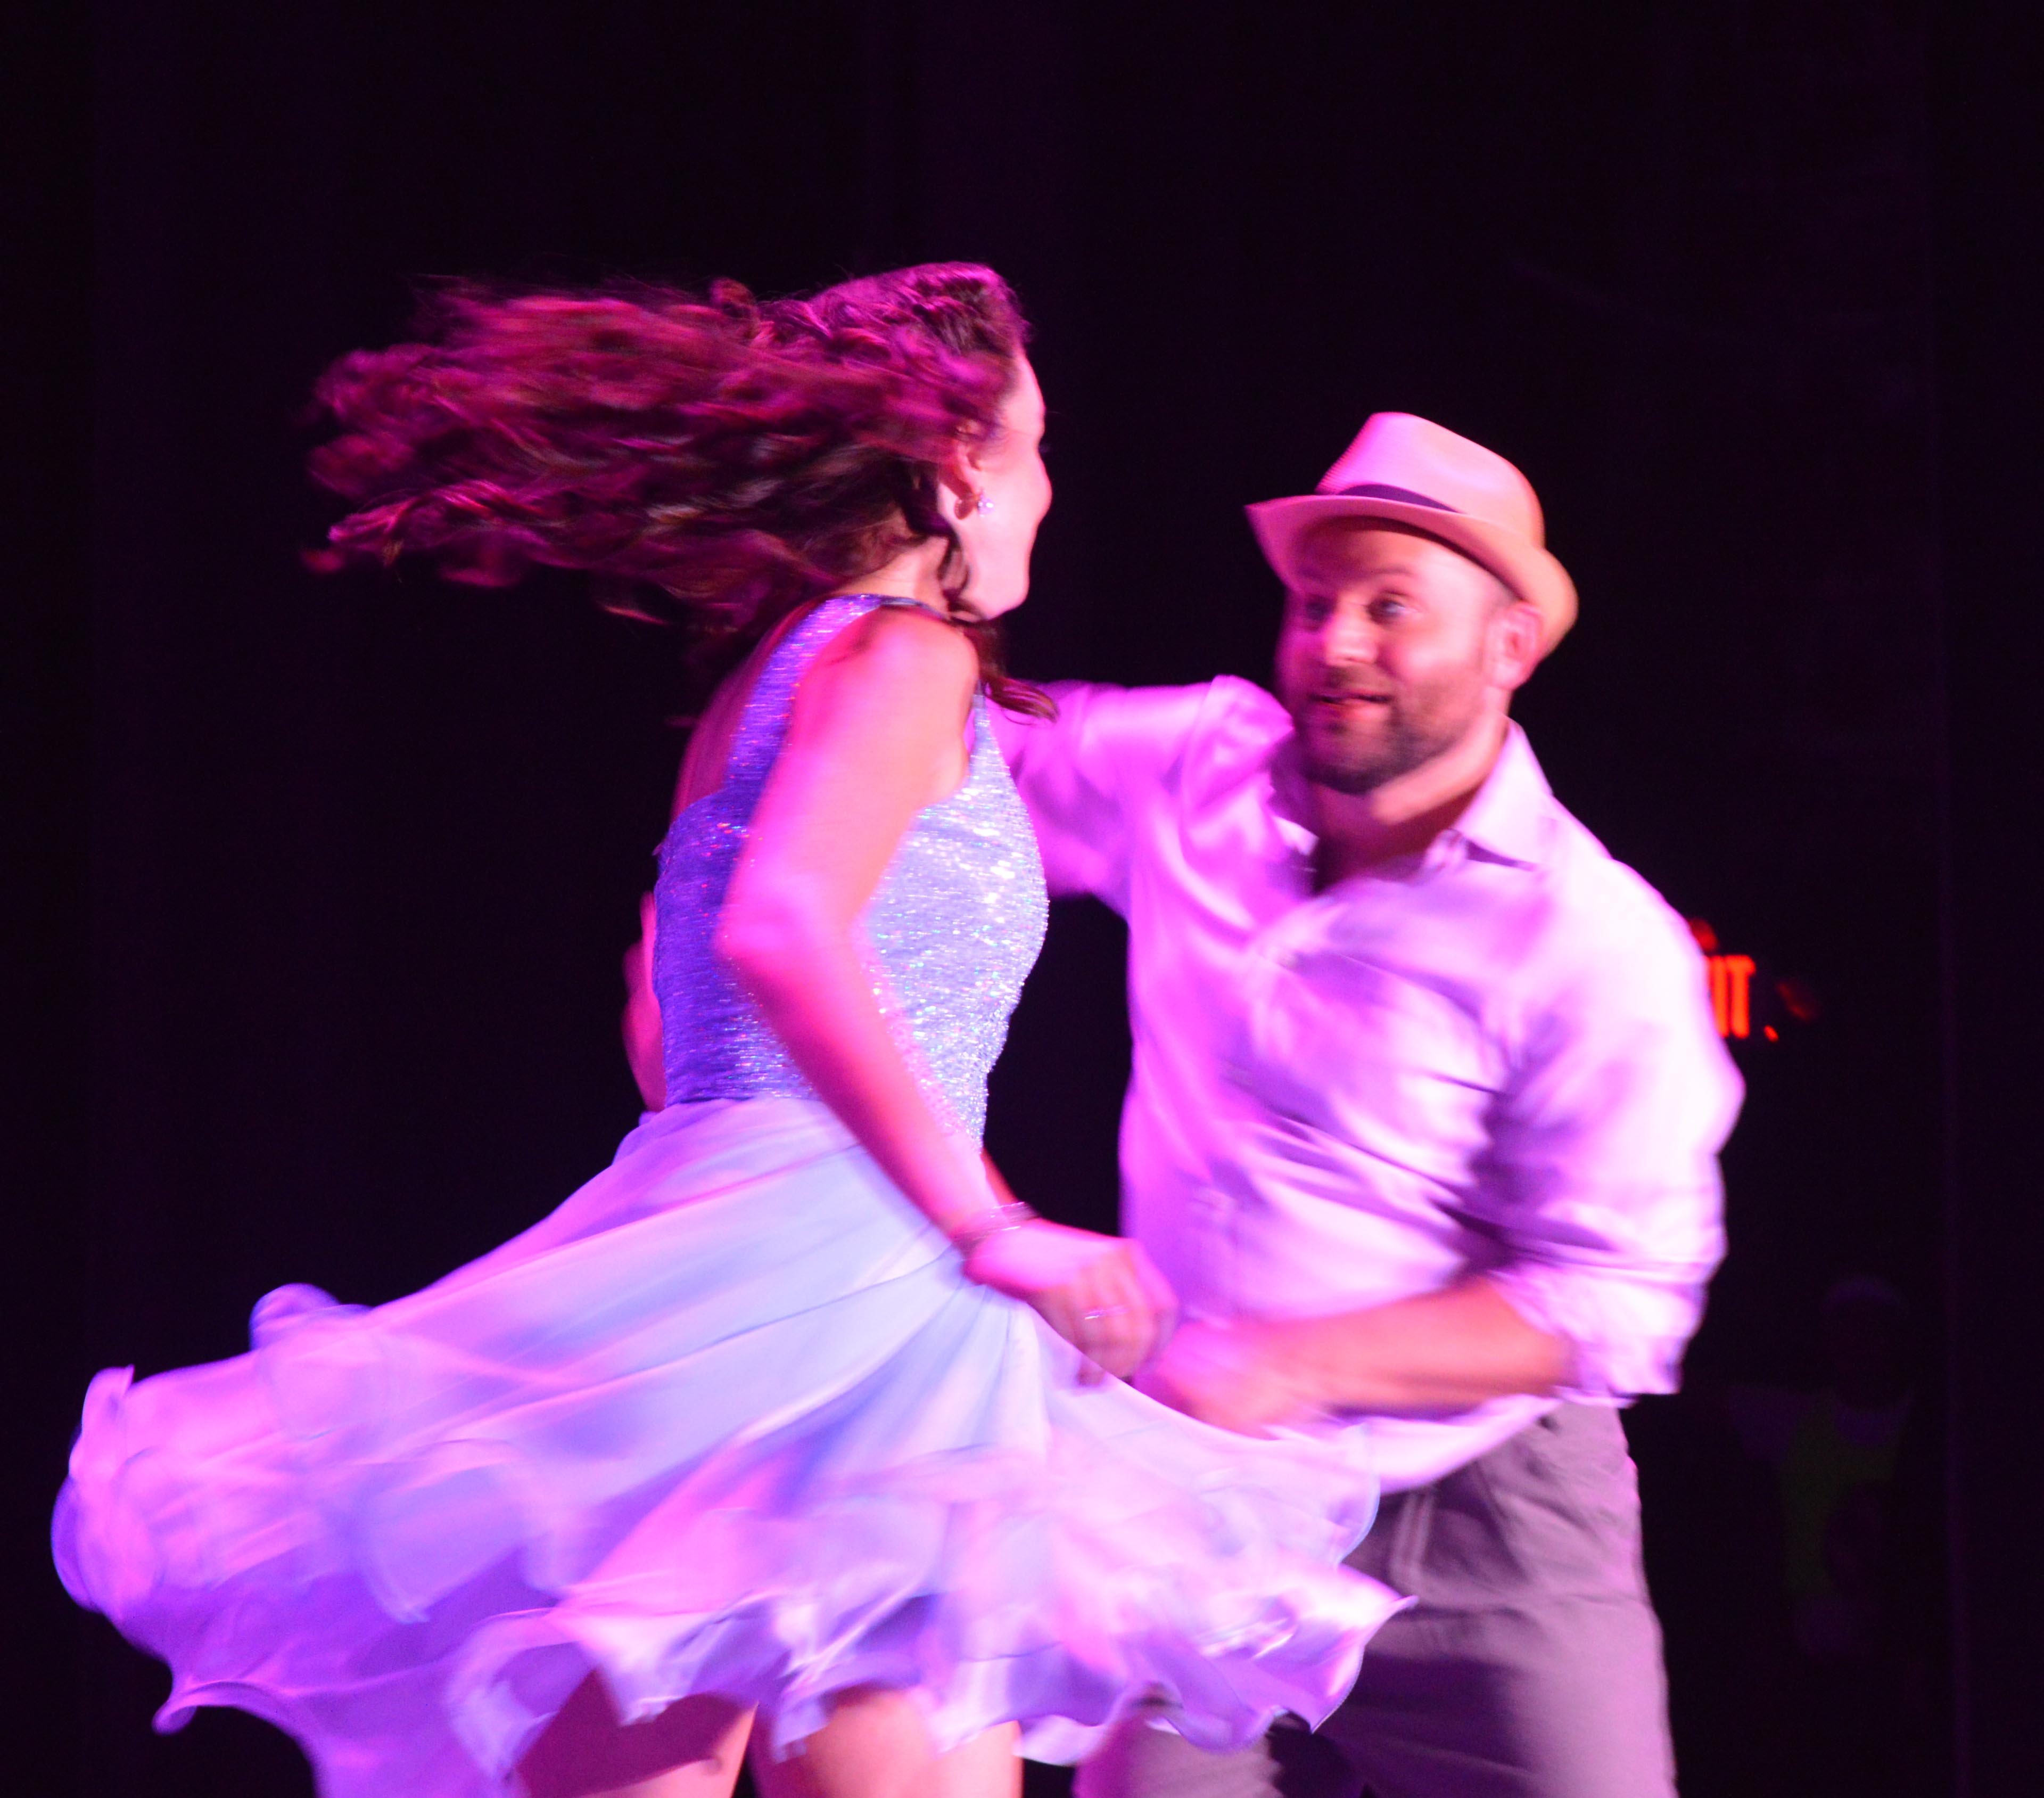 Katie Wright taking part in a local version of “Dancing with the Stars,” where she and her partner raised funds for the preservation of the 100-year-old Murphy Theatre in Wilmington, Ohio.